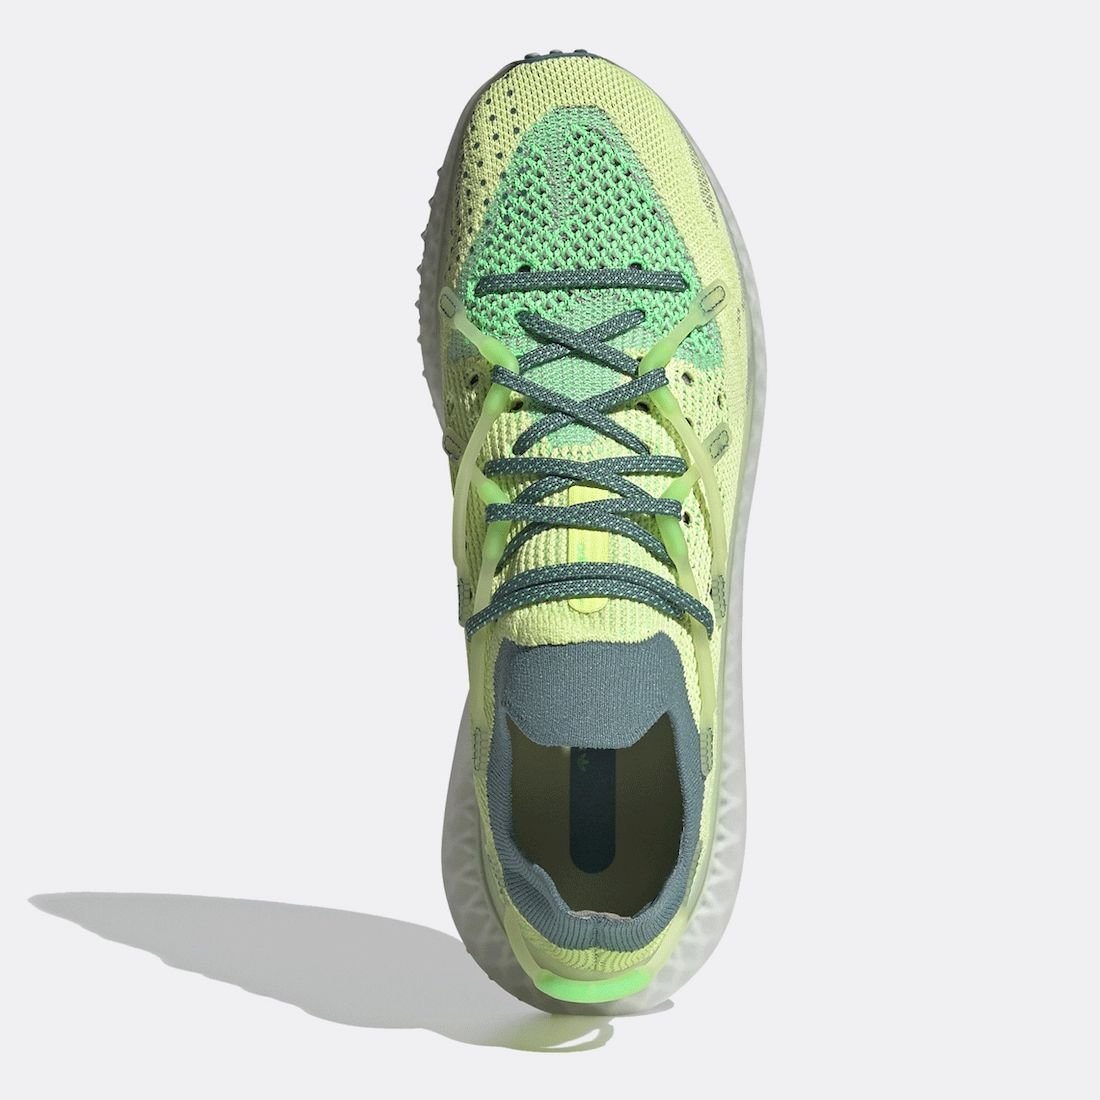 adidas 4D Fusio Frozen Yellow FY3603 Release Date Info